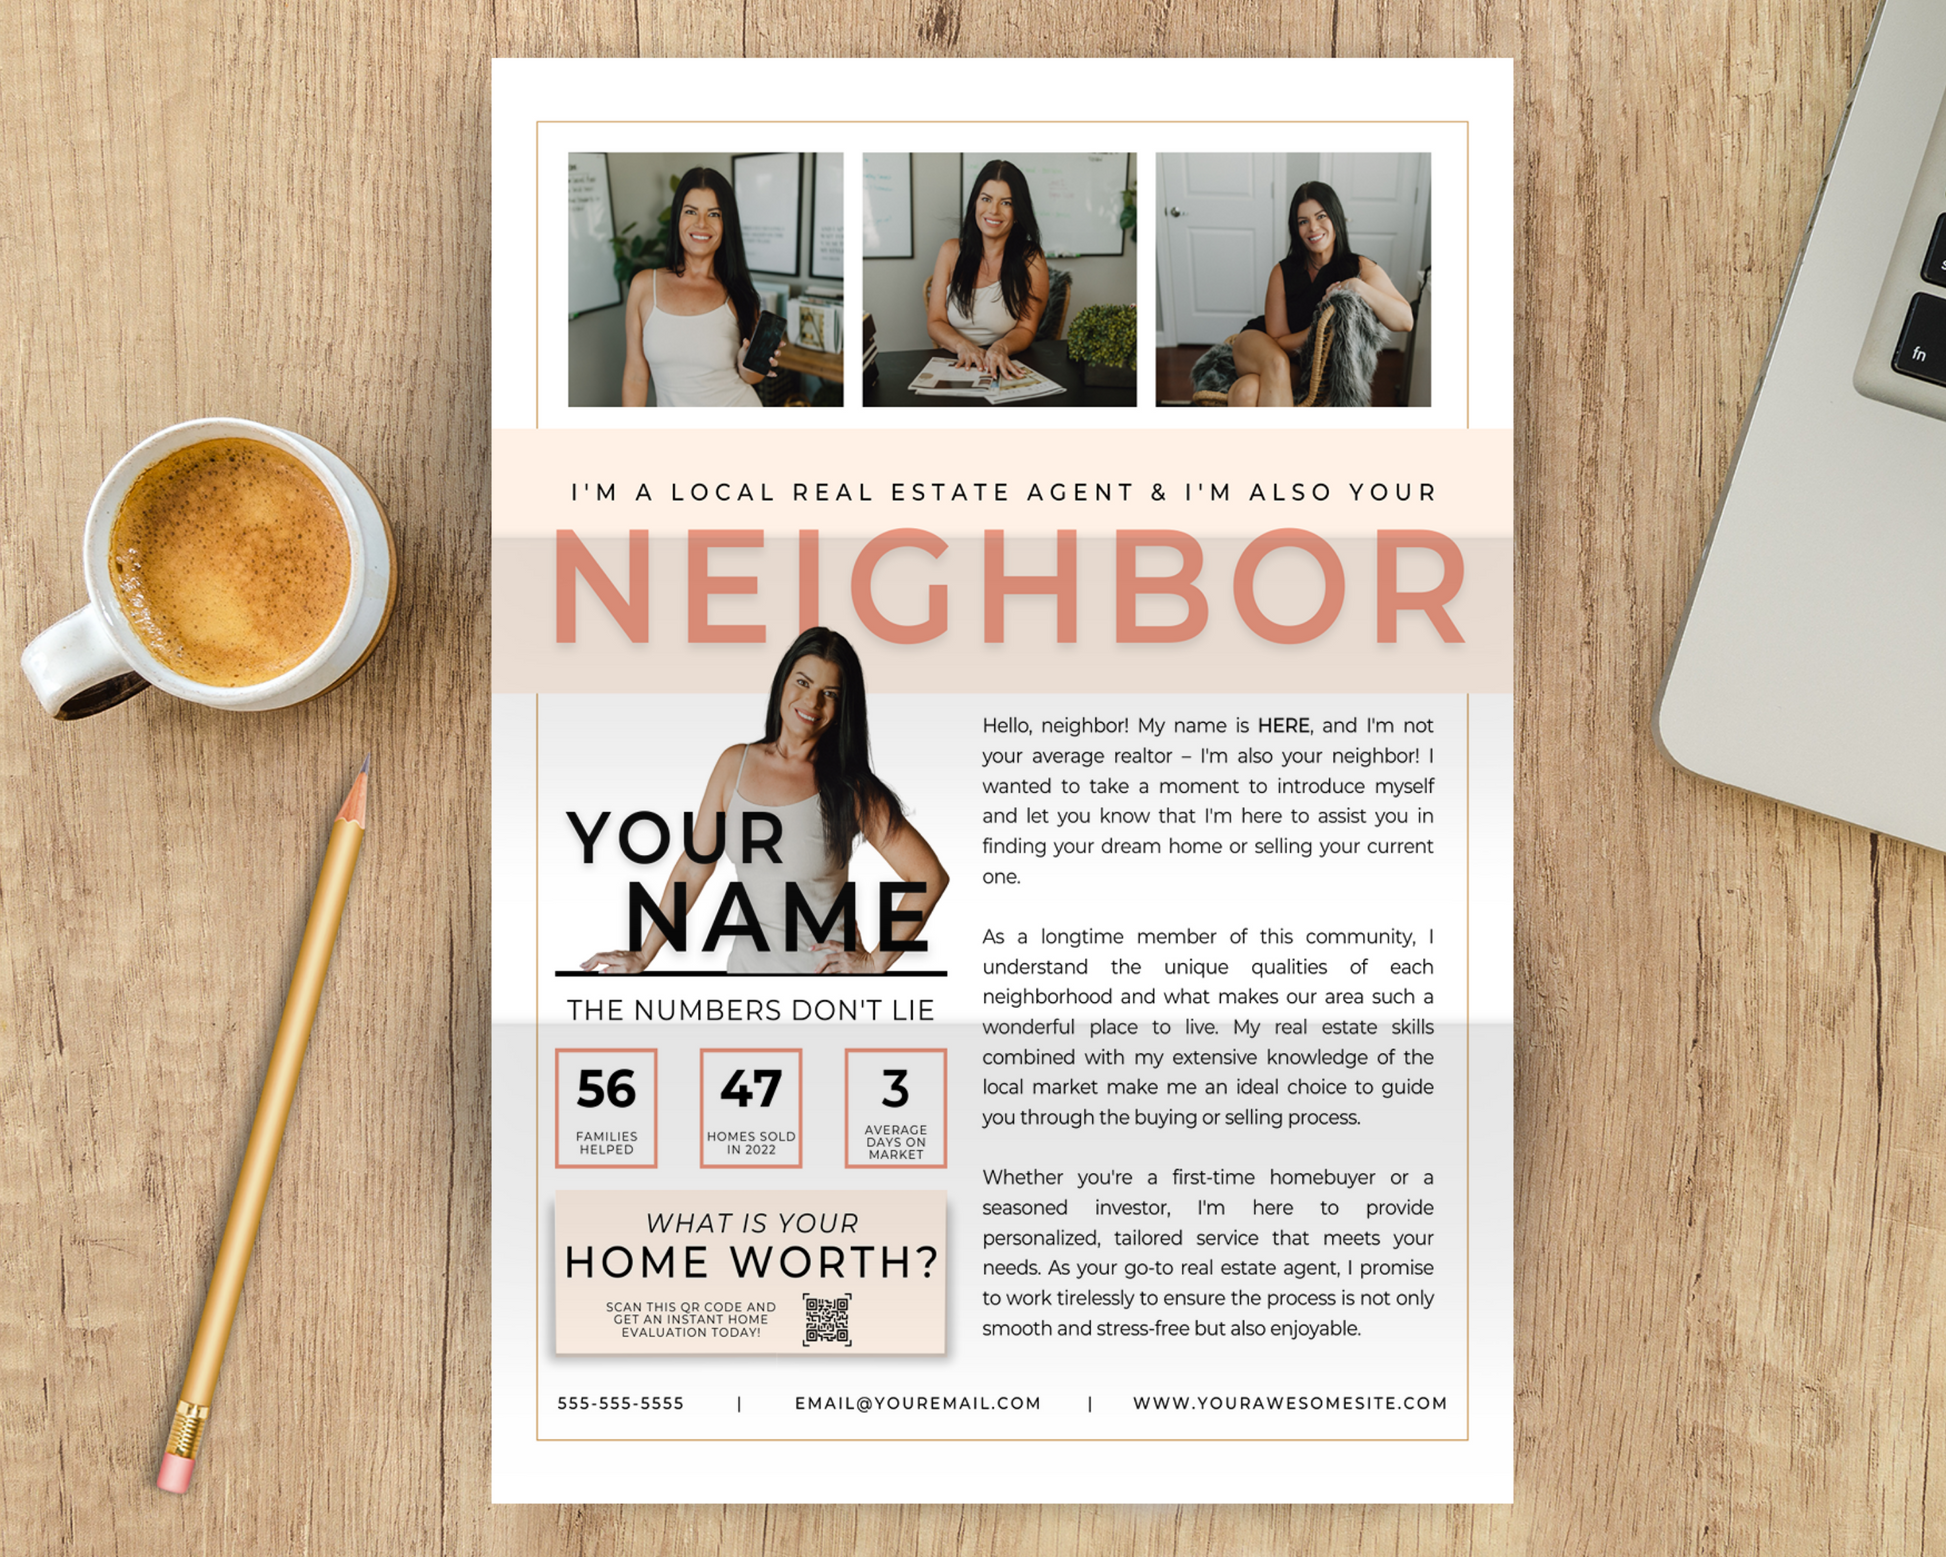 Real Estate Template – I'm Your Neighbor Letter